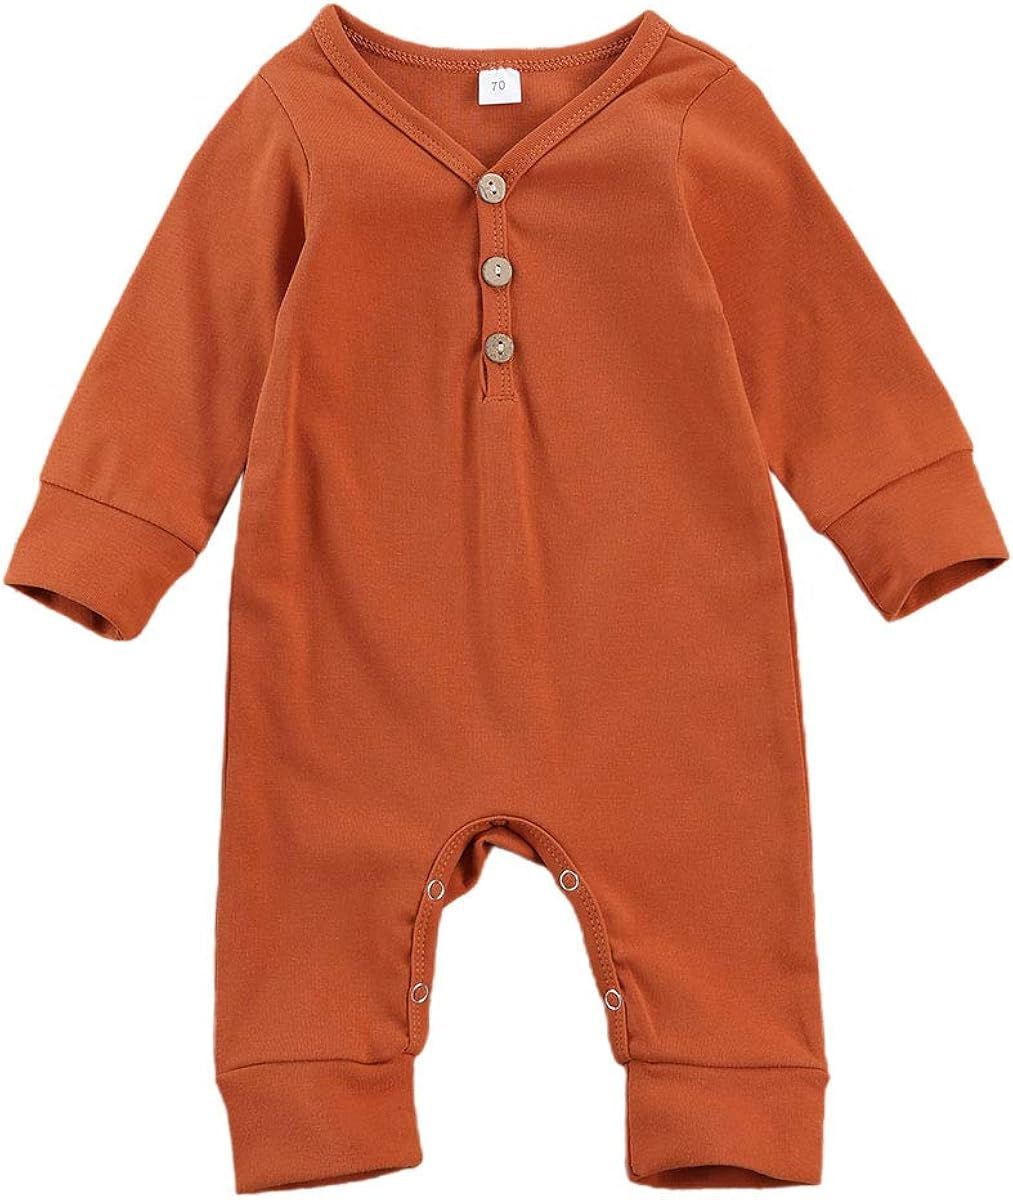 Newborn Kids Baby Boys Cute Solid Color Romper Jumpsuit Top Outfits Clothes | Amazon (US)